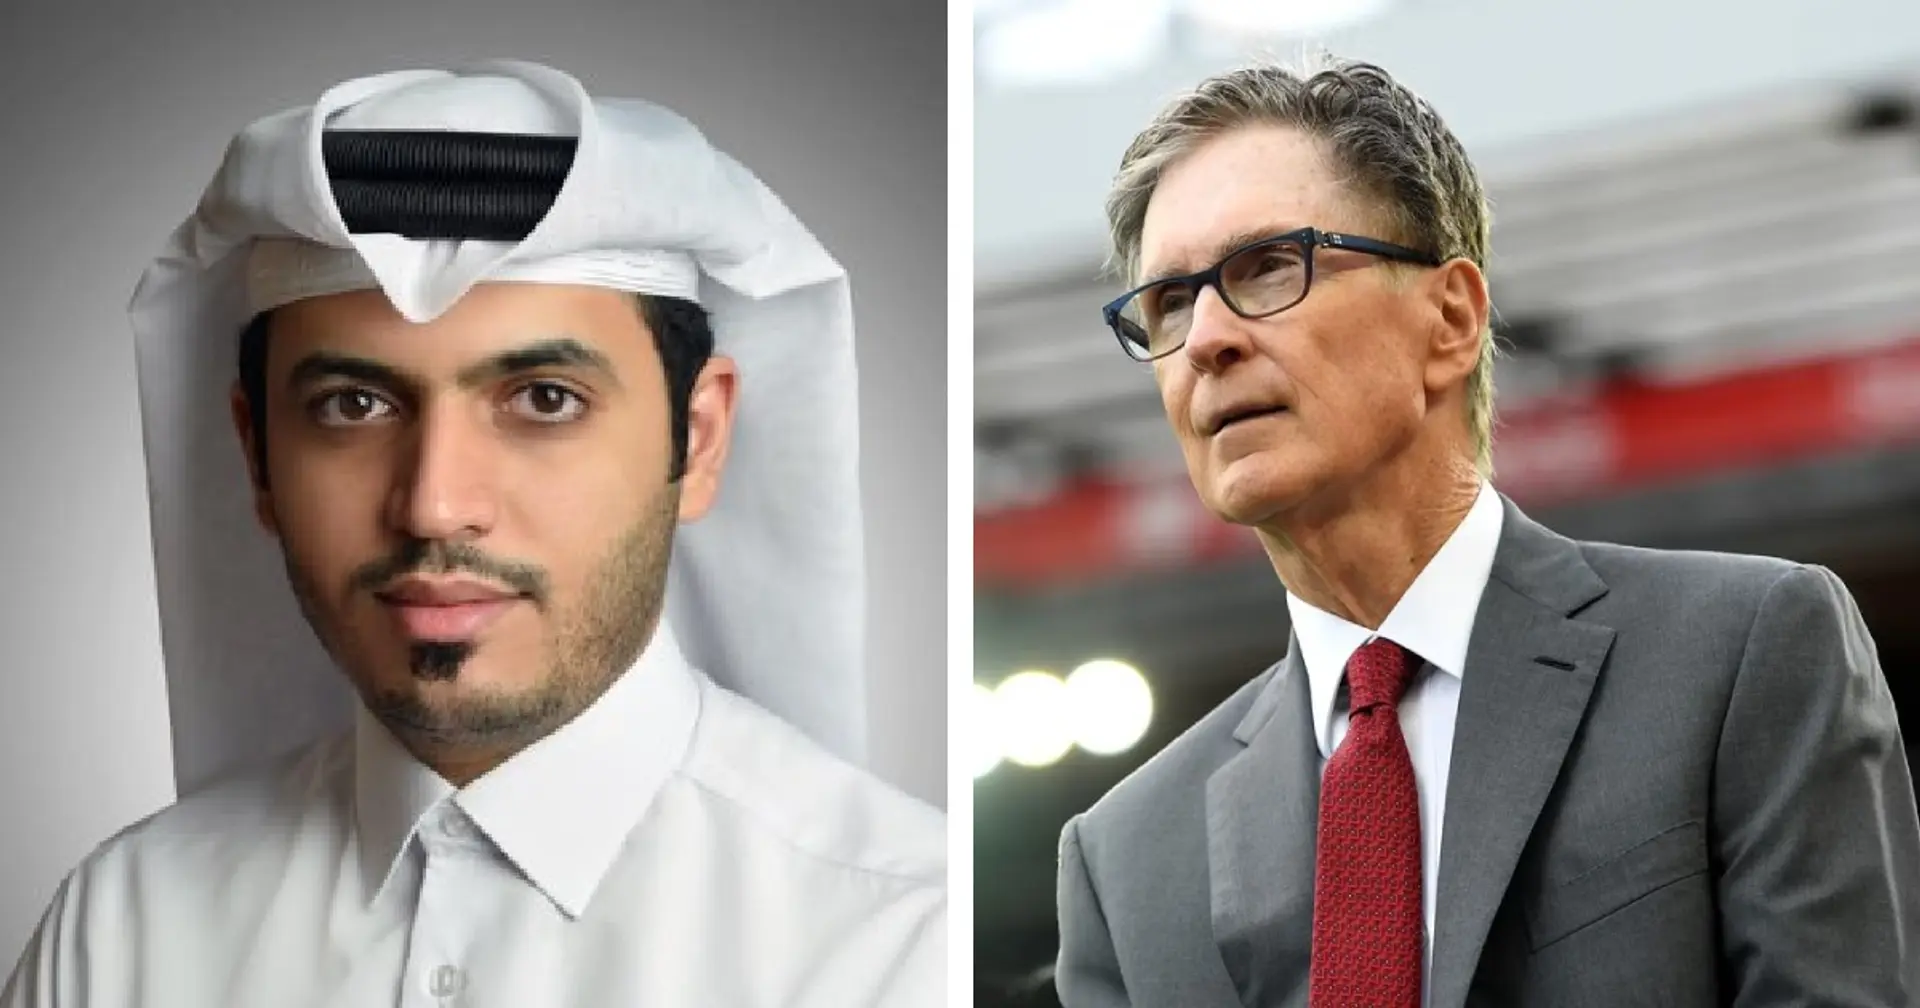 Qatari journalist seemingly provides update on Liverpool takeover with a short message in Arabic